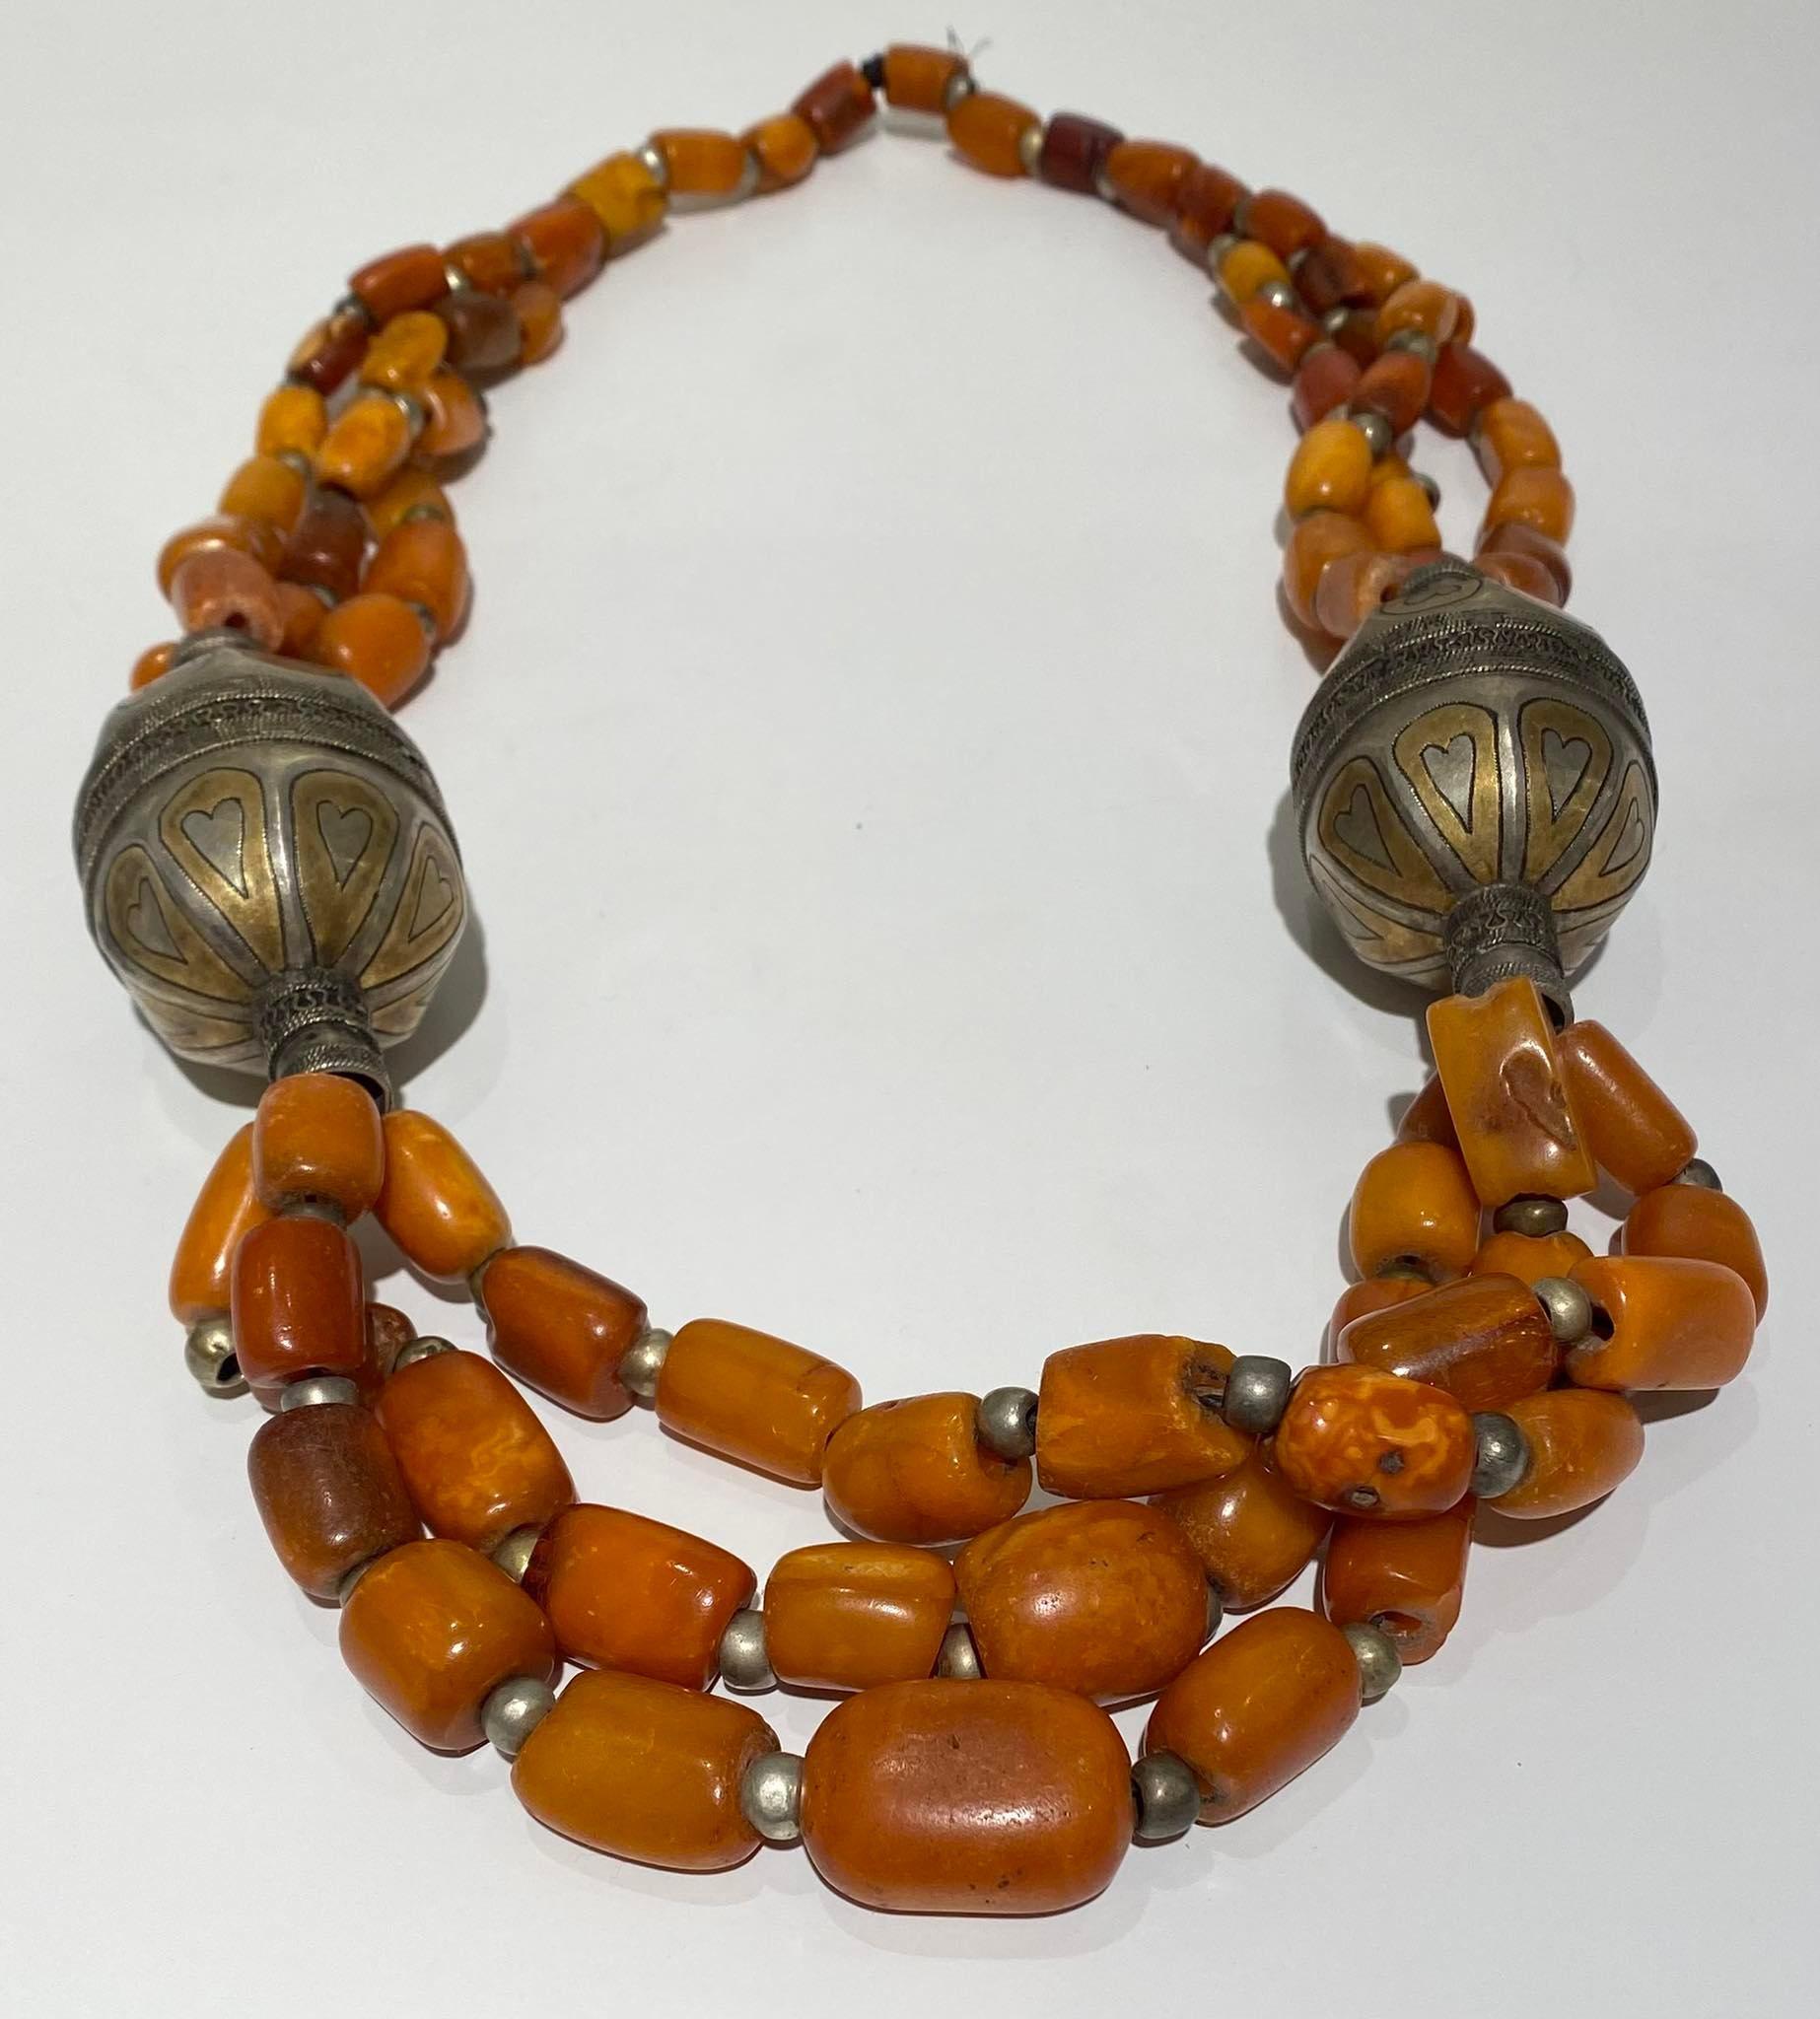  Antique Amber Necklace Yemen Afghanistan 18/19th Century Islamic Art silver  In Excellent Condition For Sale In Leuven, BE